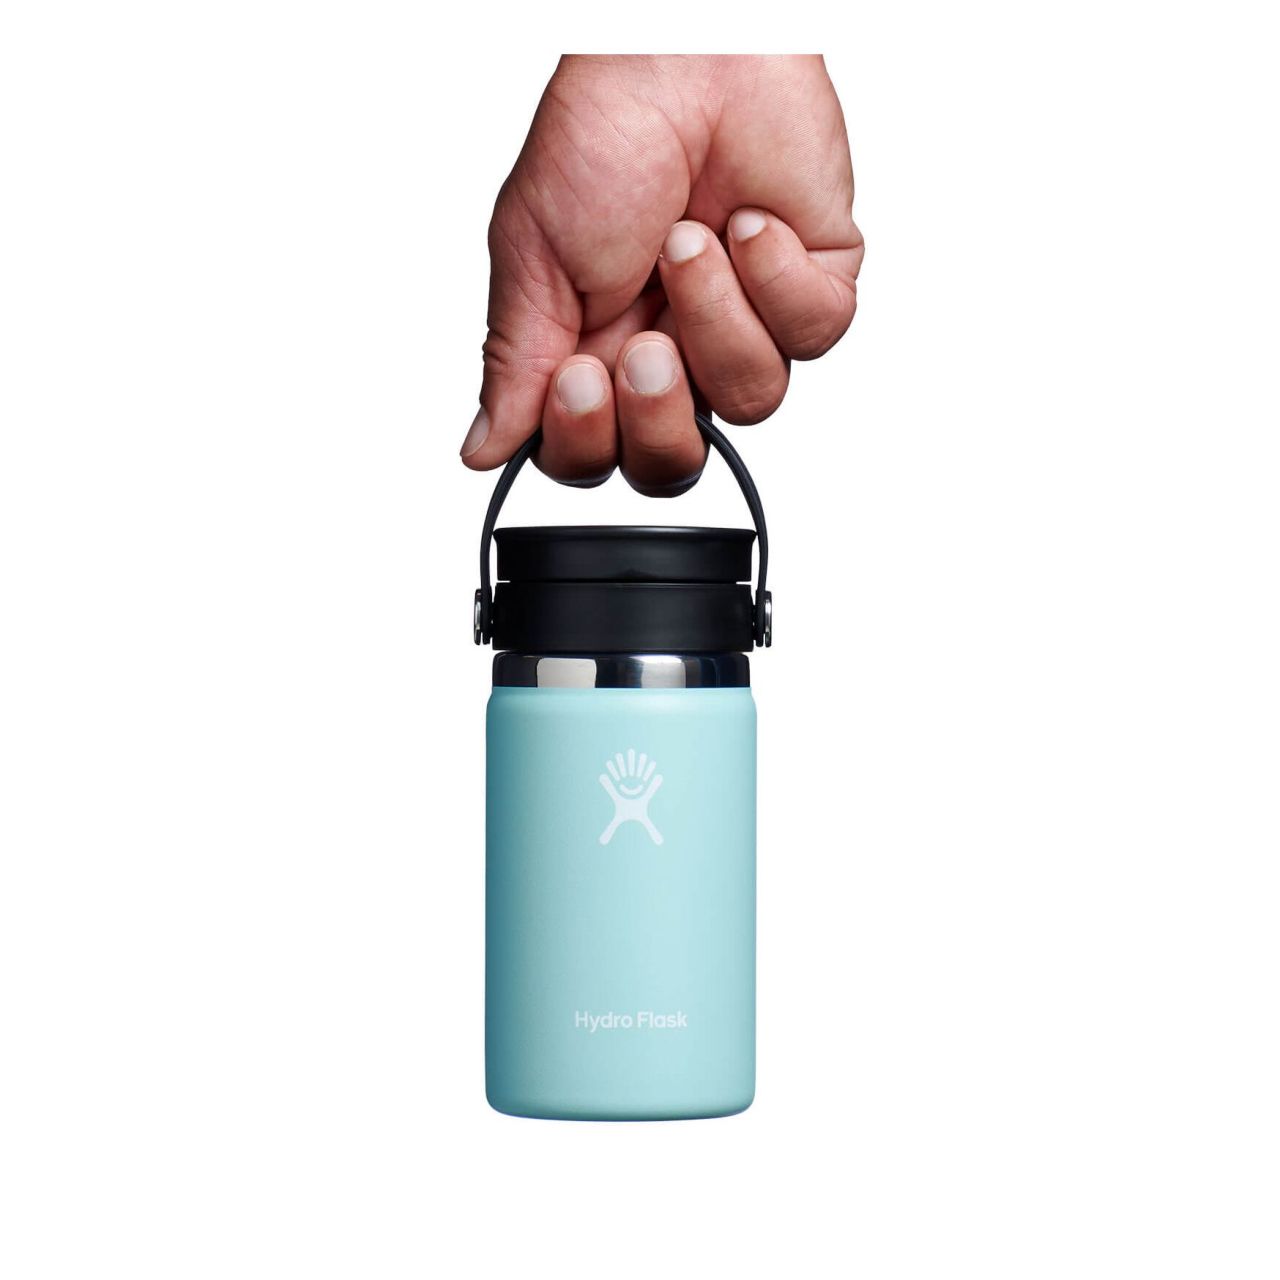 Hydro Flask 12oz Wide Mouth Coffee Flask with Flex Sip Lid